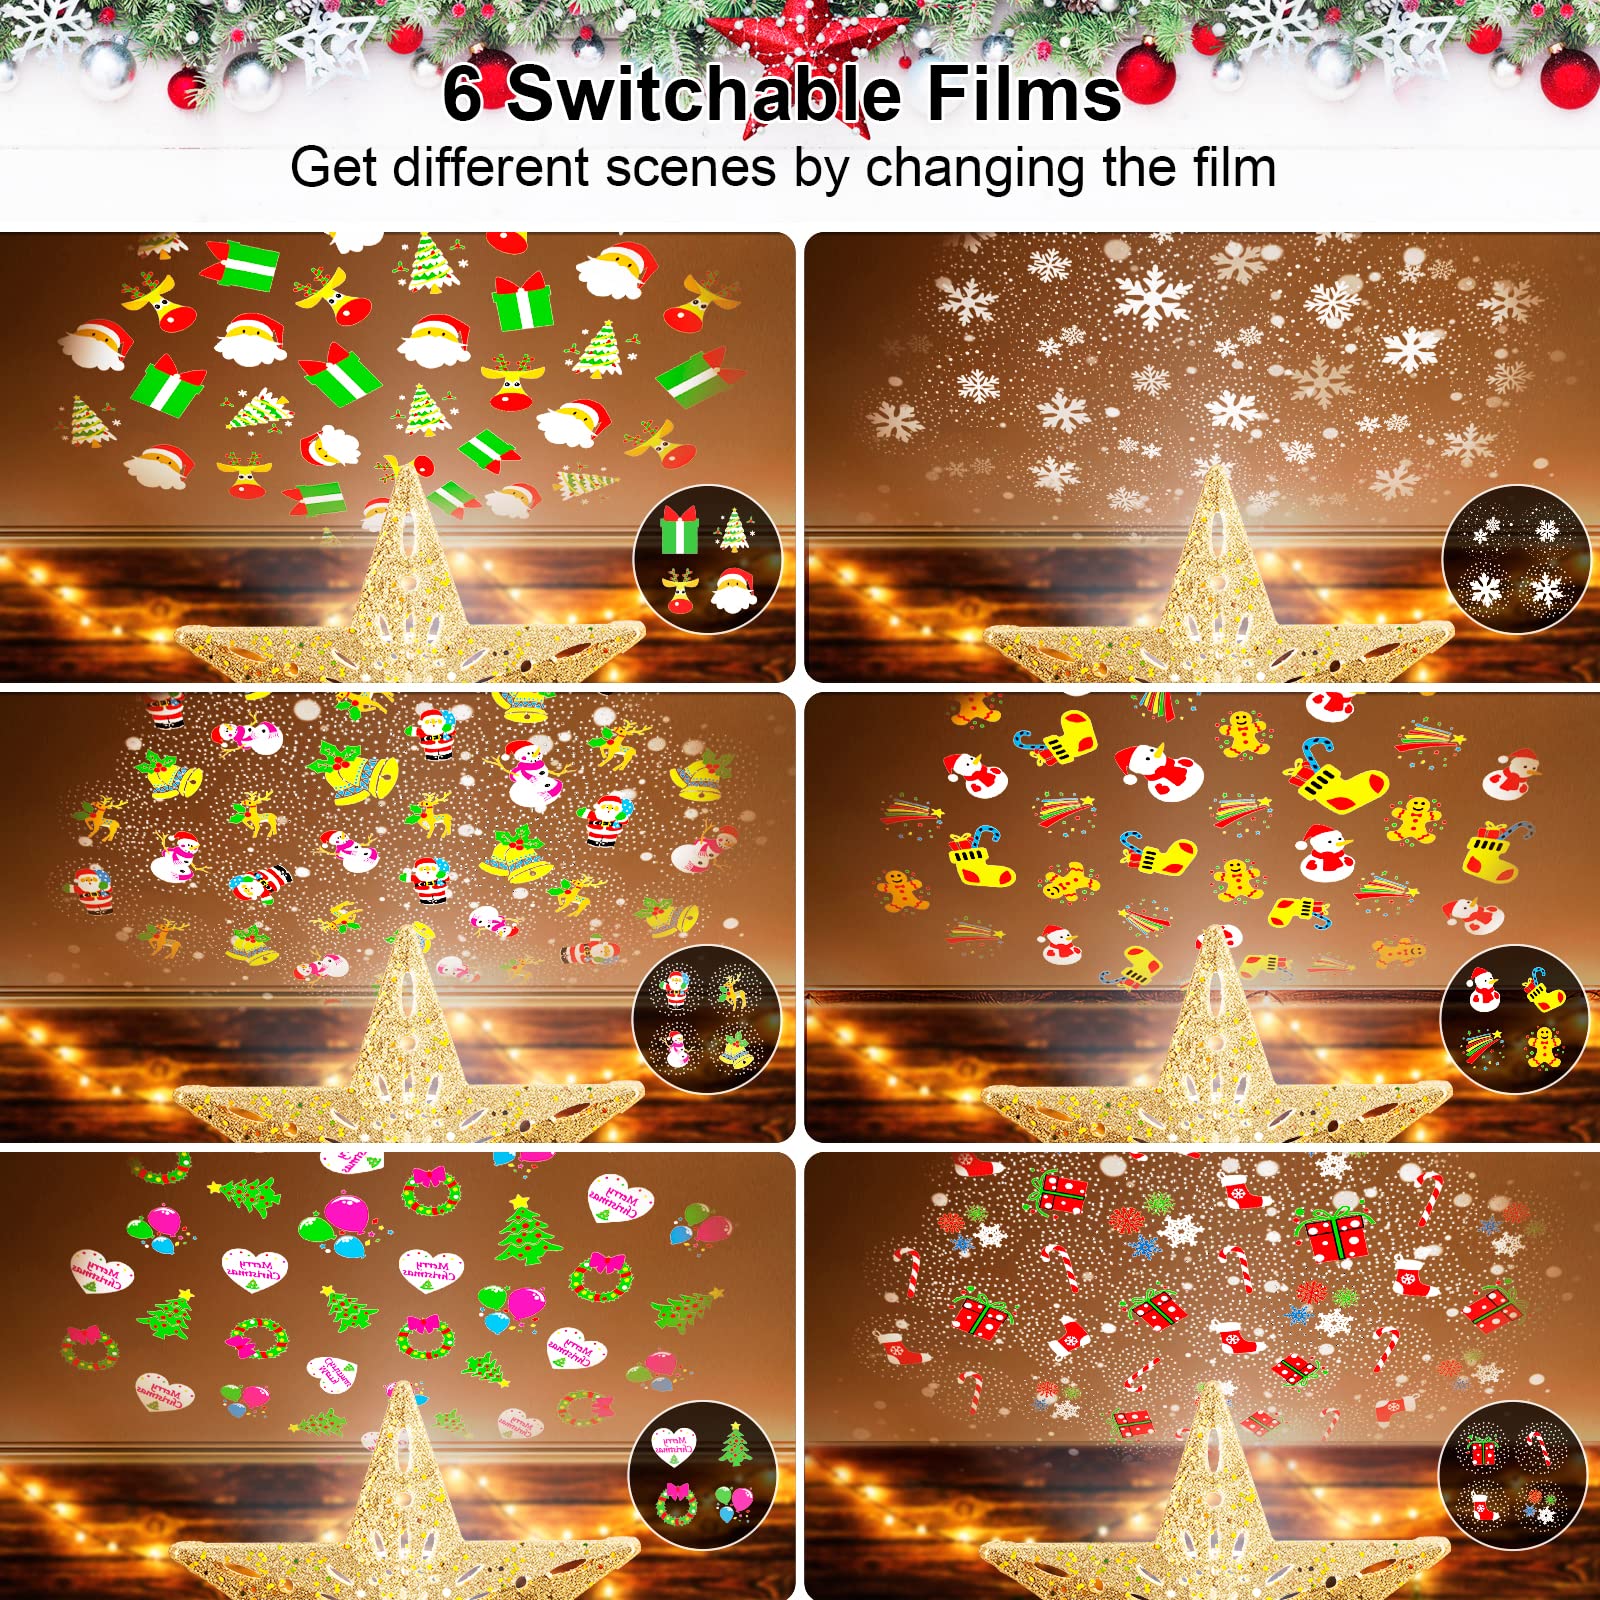 10 Inches / Golden Star Topper / 6 Switchable Films Projection